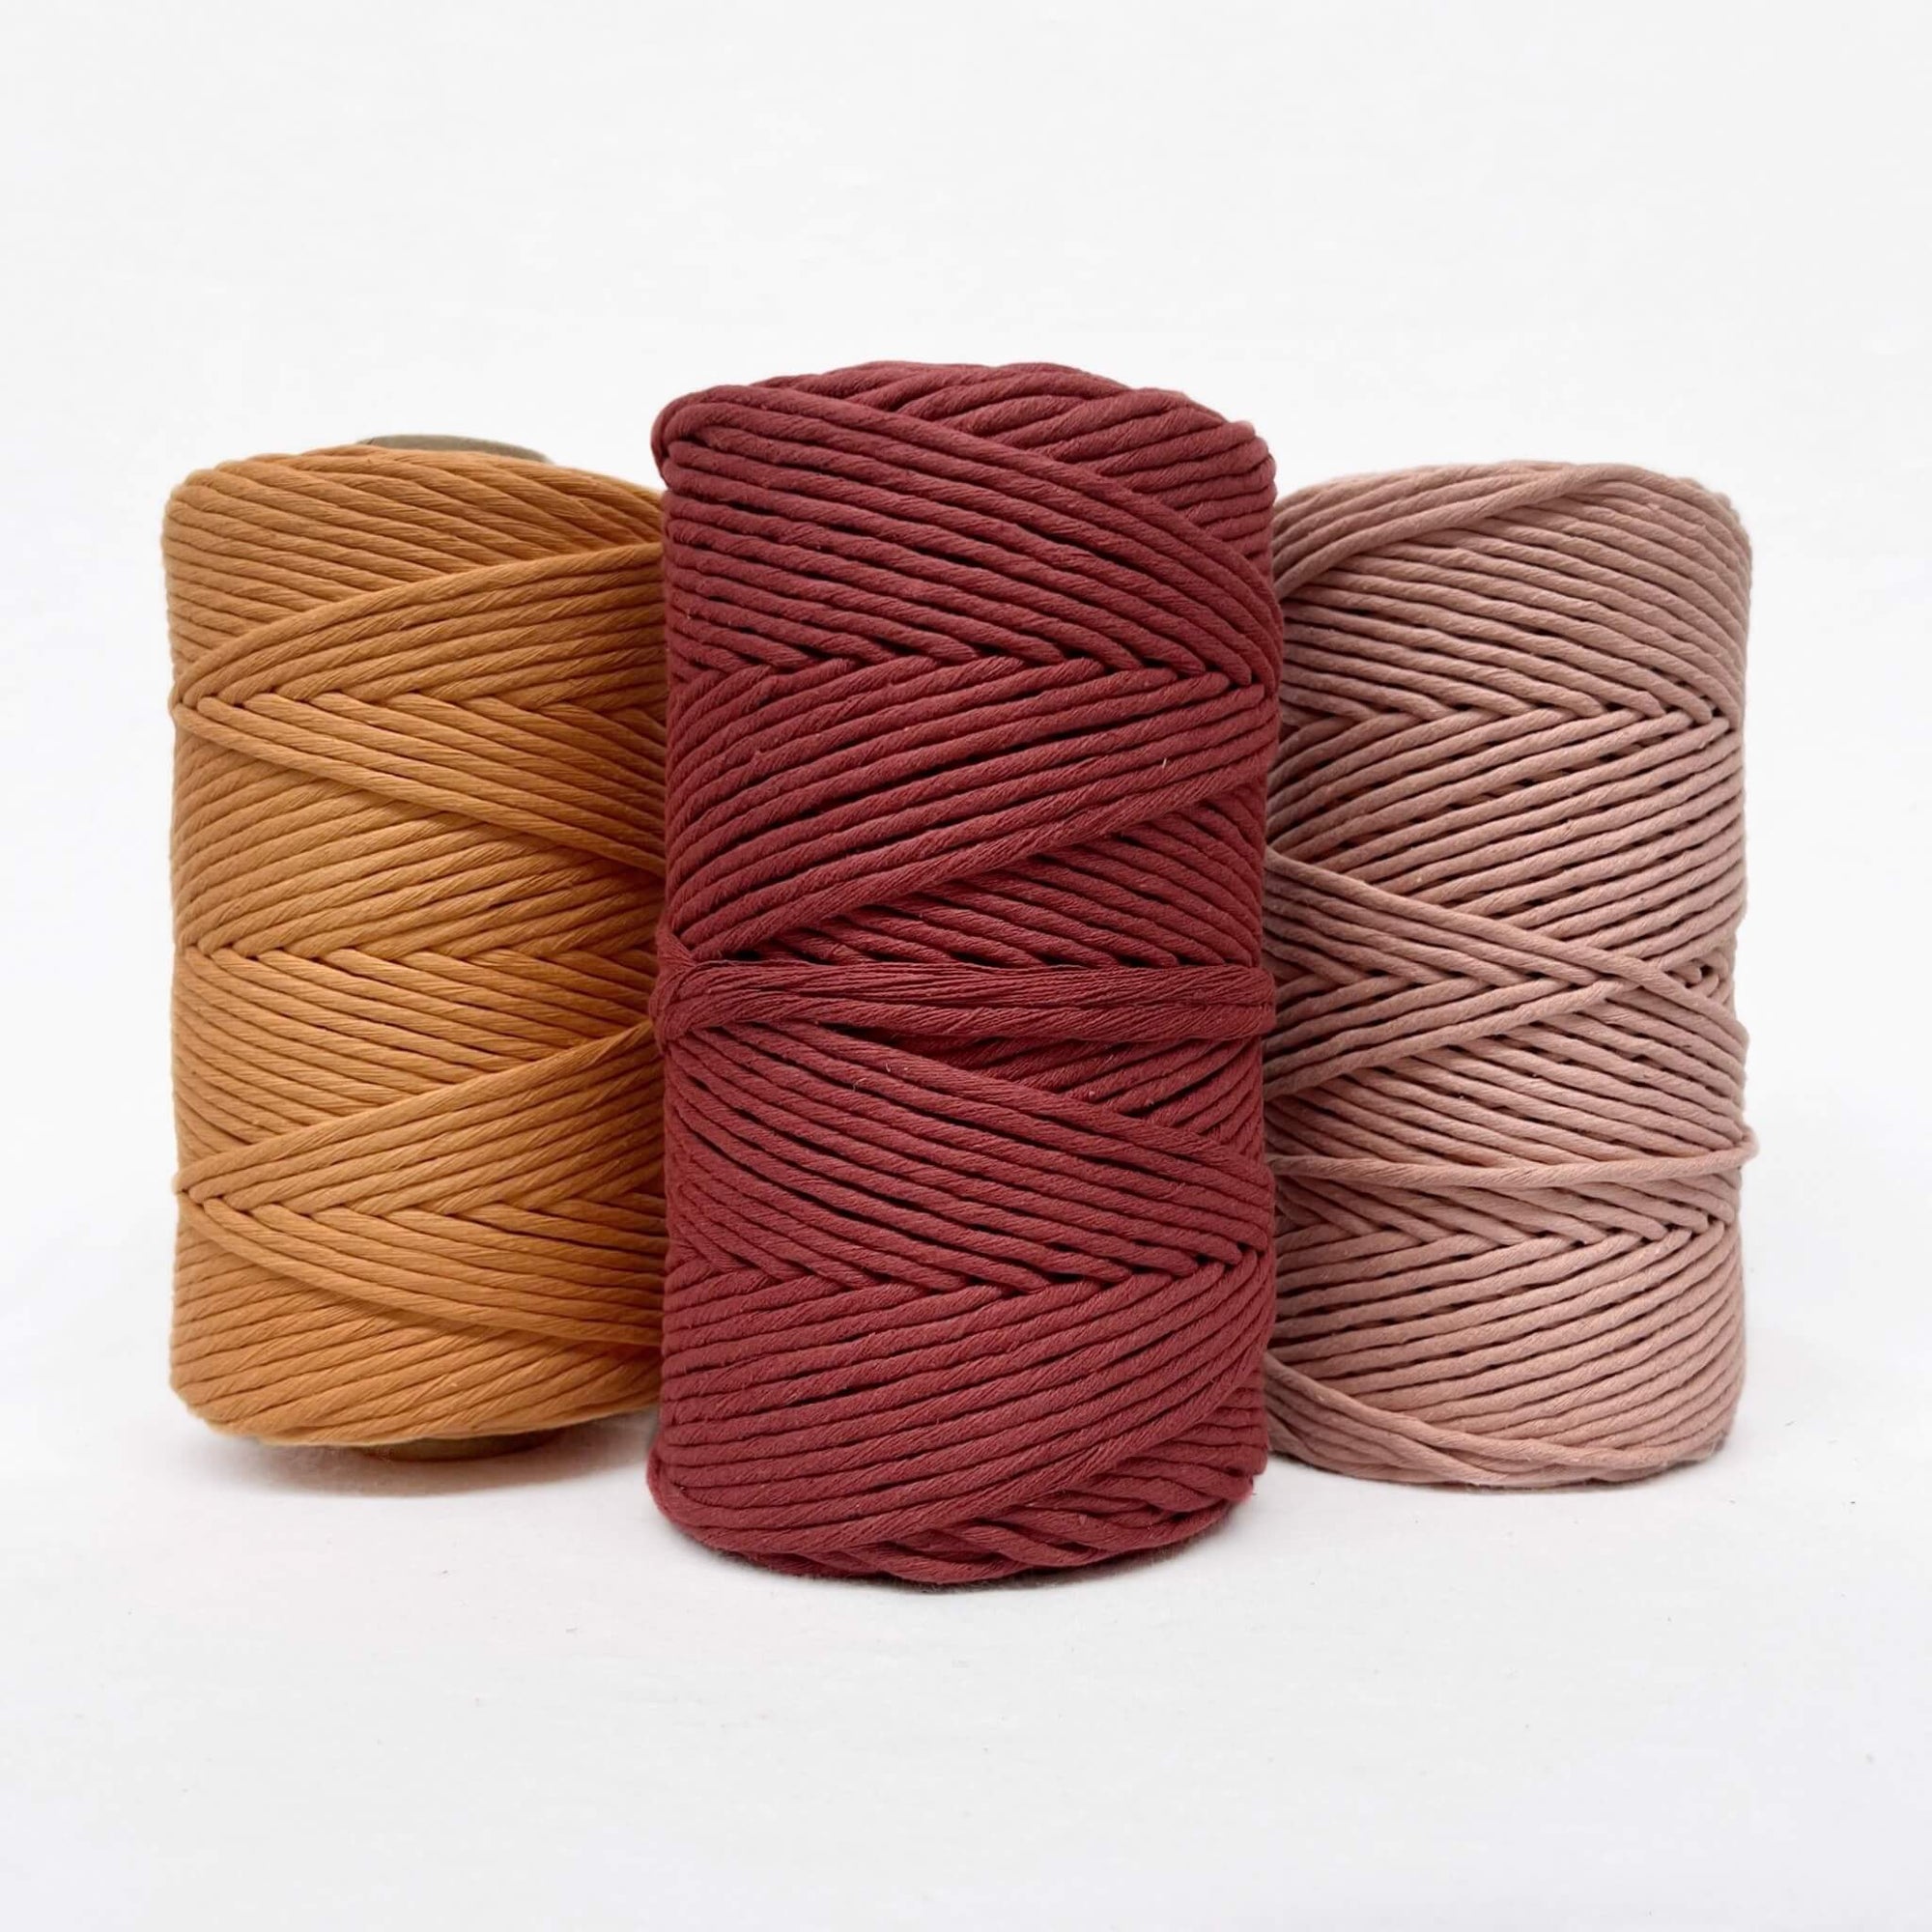 mary maker studio 1kg 5mm recycled cotton macrame string in neutral vintage peach colour suitable for macrame workshops beginners and advanced artists